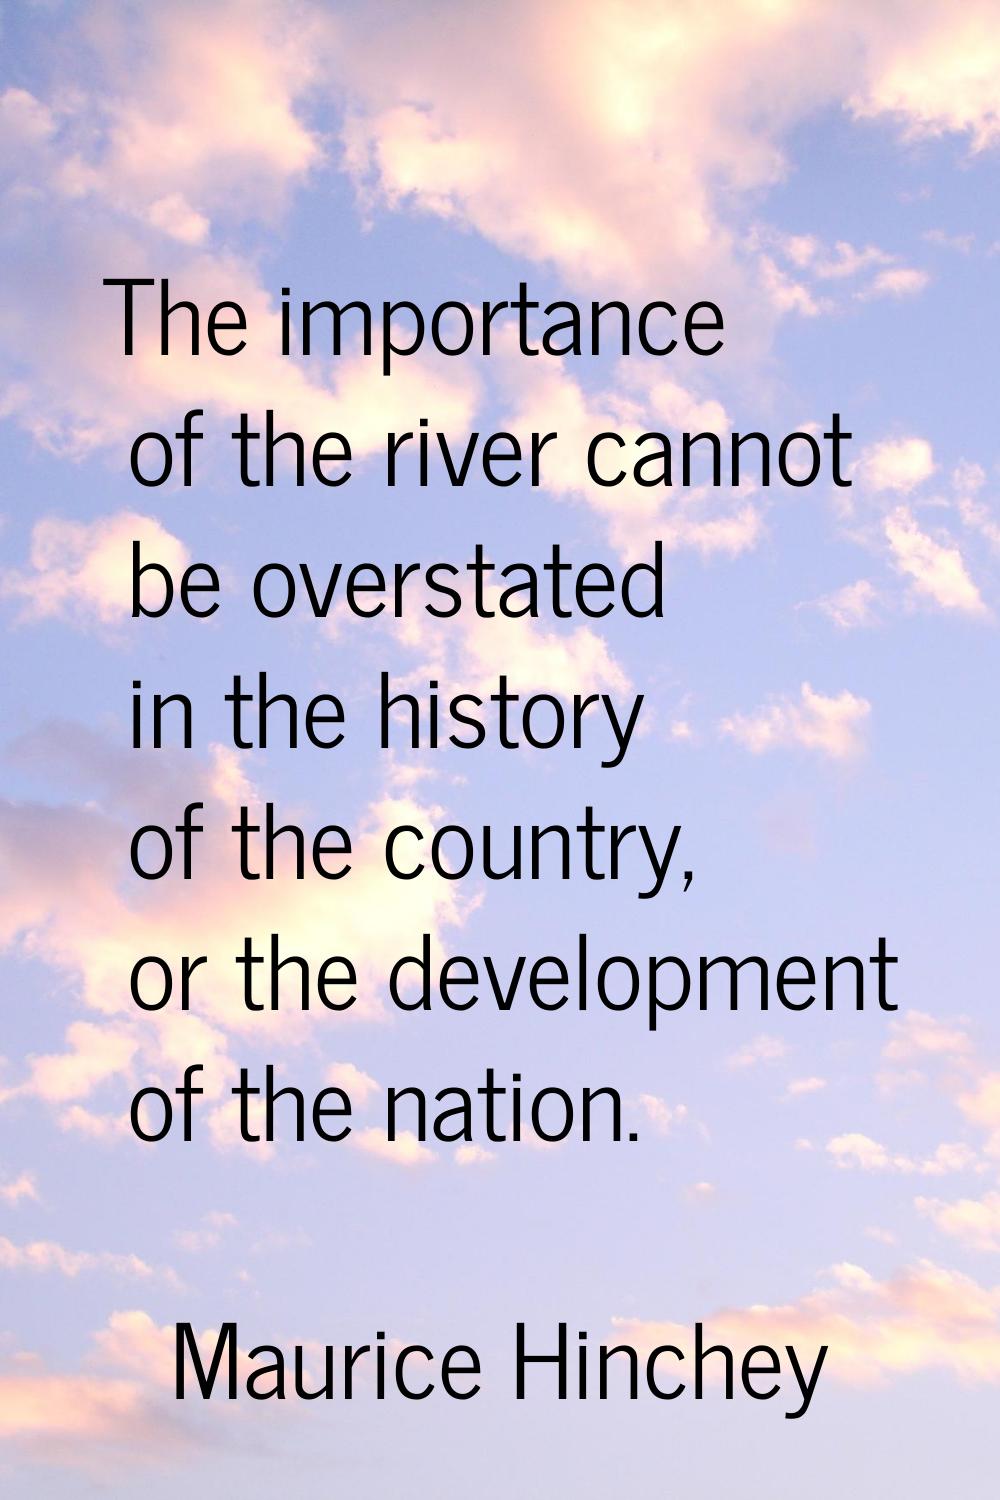 The importance of the river cannot be overstated in the history of the country, or the development 